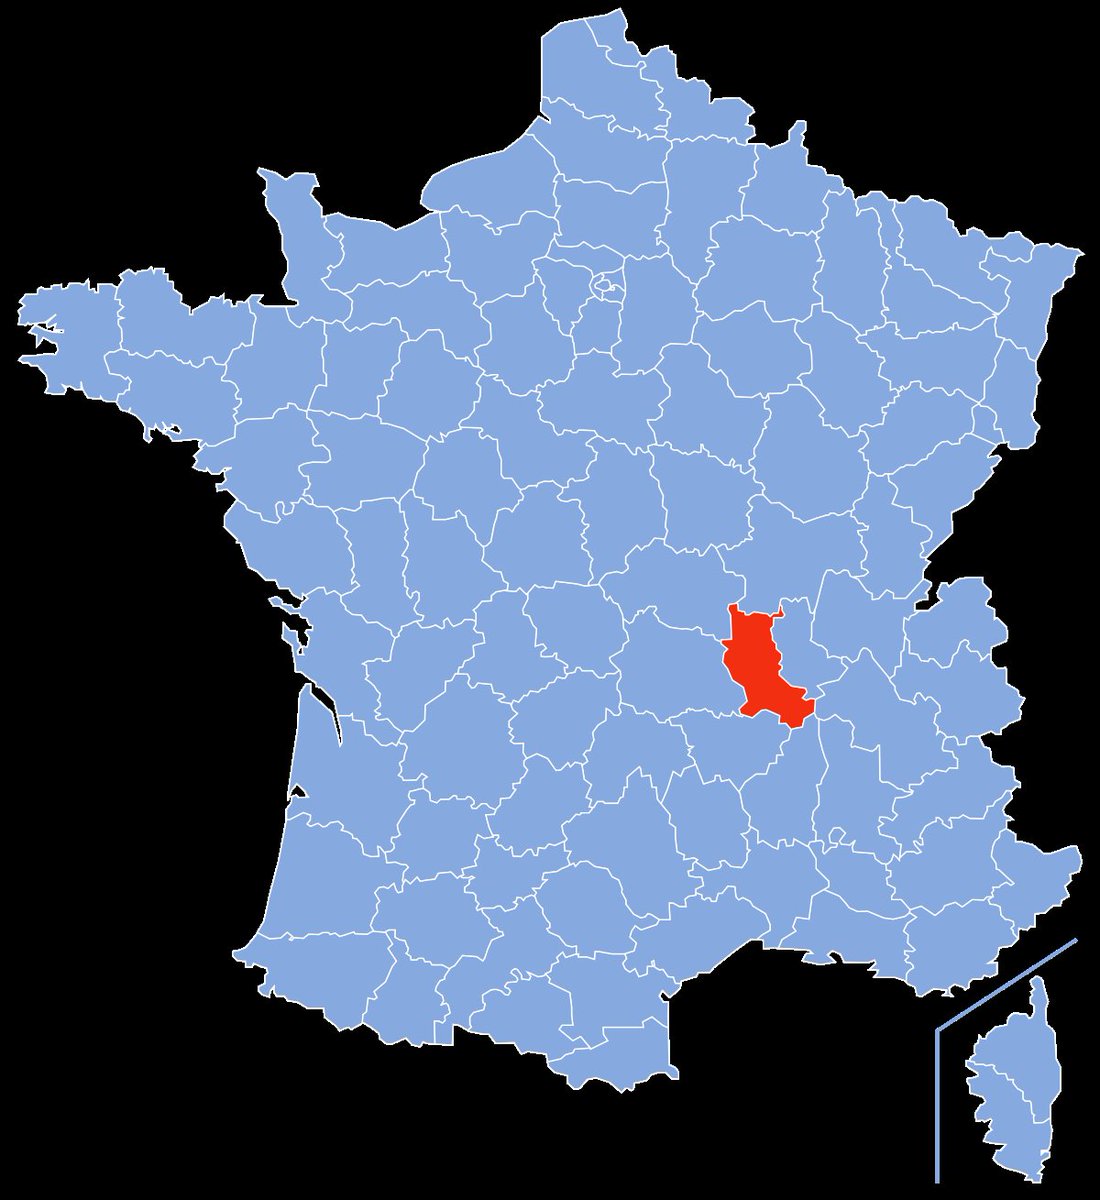 74. loire (42)prefecture : saint-étienneseems okay plus, close to a big city, i don't have much of an opinion on it tbh it's cool i guess